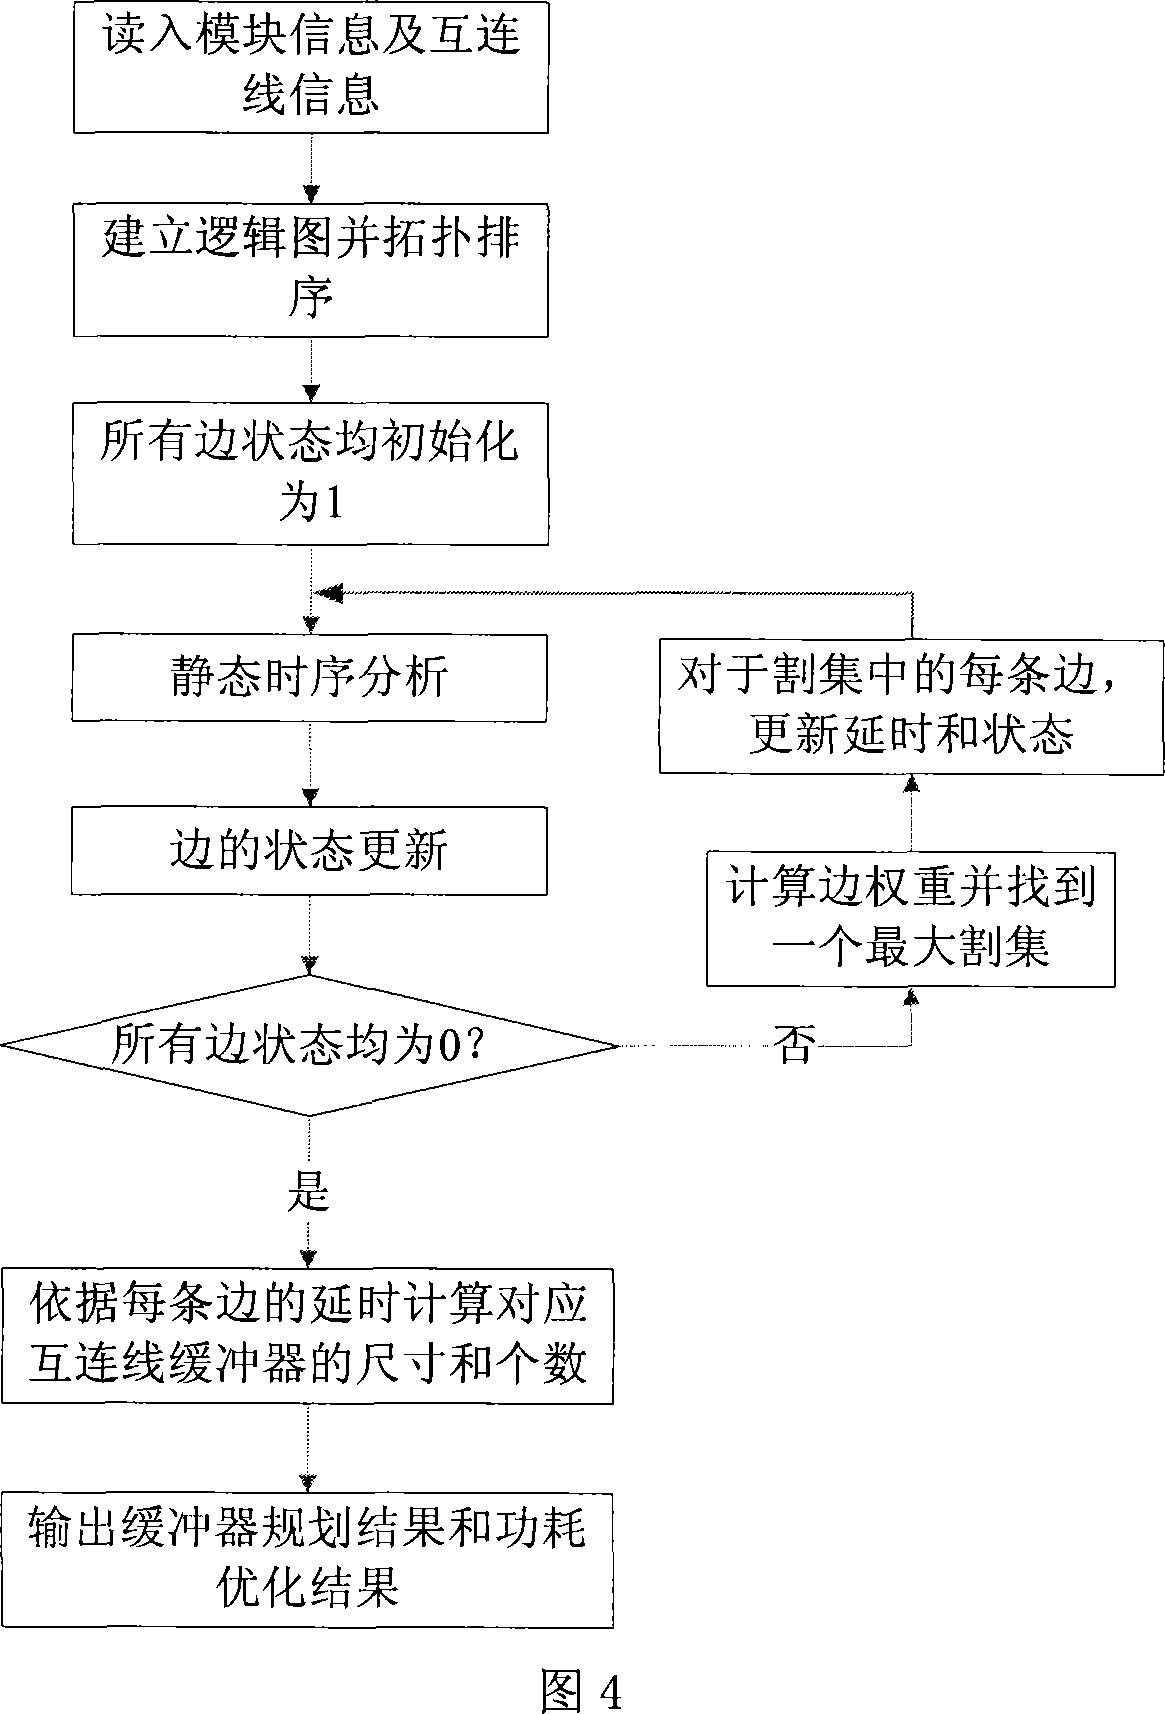 Full-chip interconnecting line power consumption optimum layout stage buffer planning method